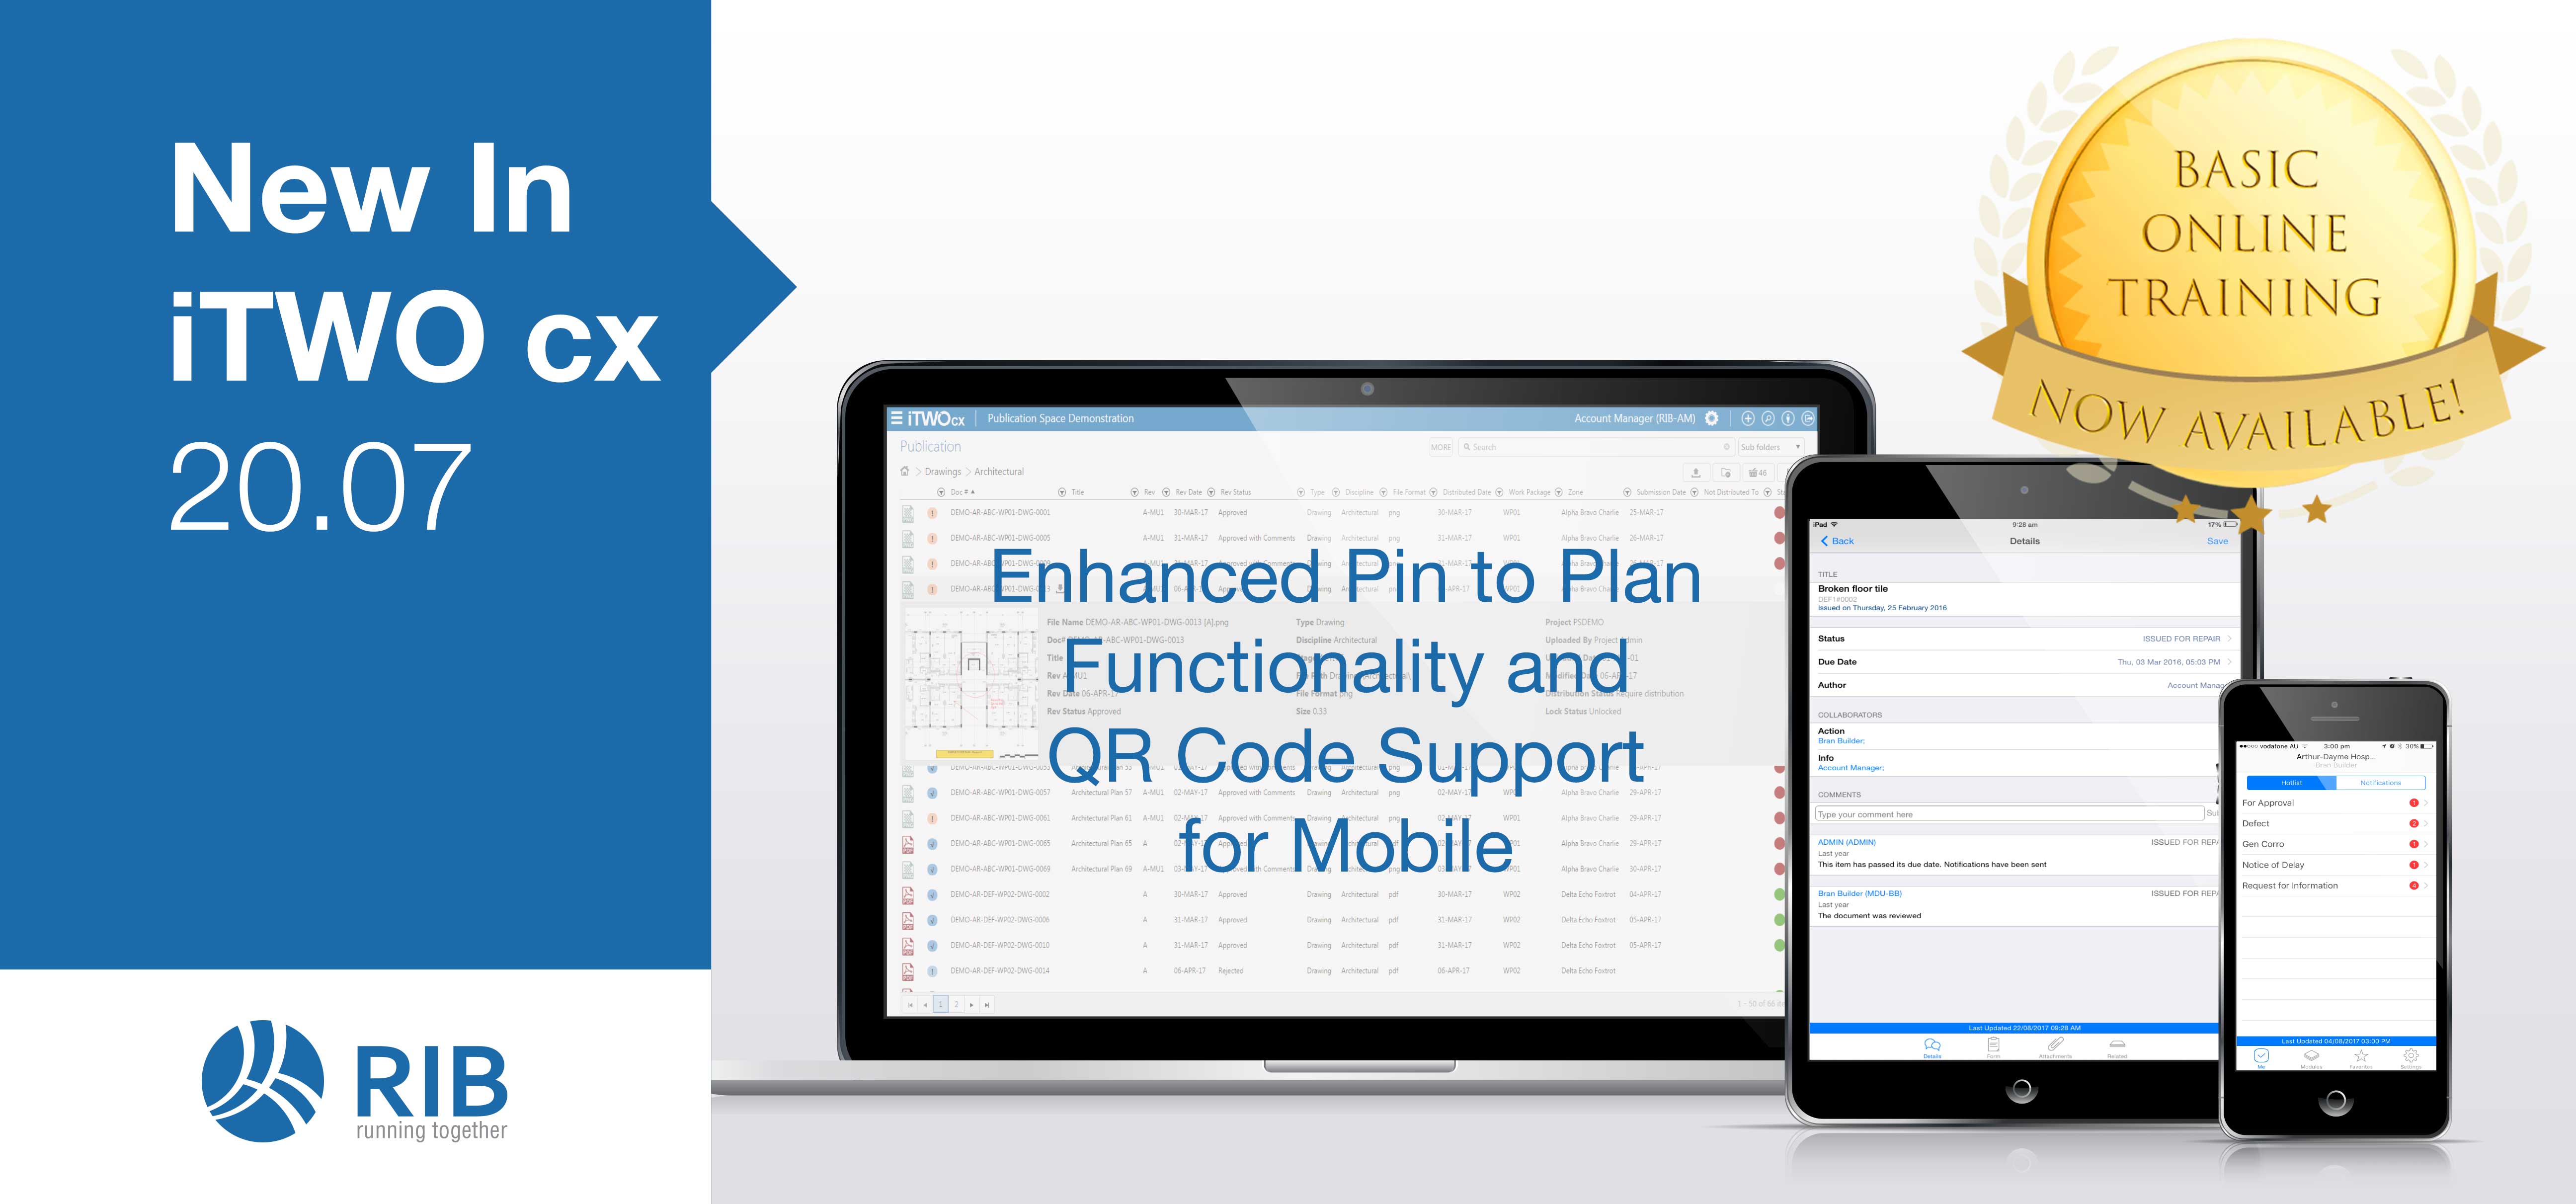 New in iTWO cx - Enhanced Pin to Plan Functionality